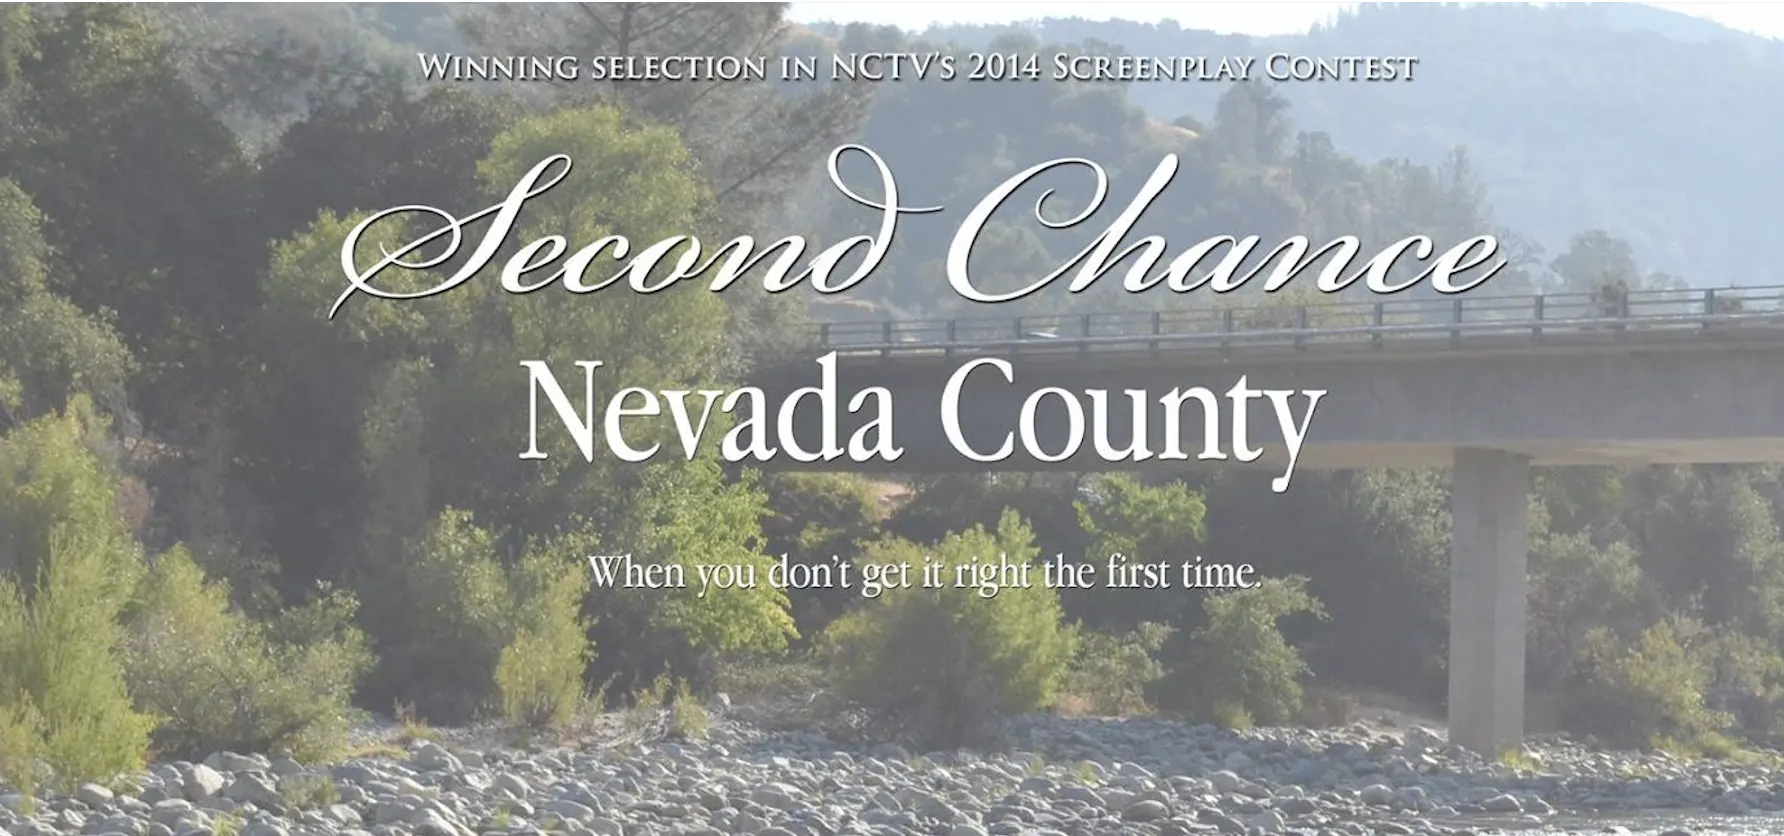 Second Chance, Nevada County movie title.